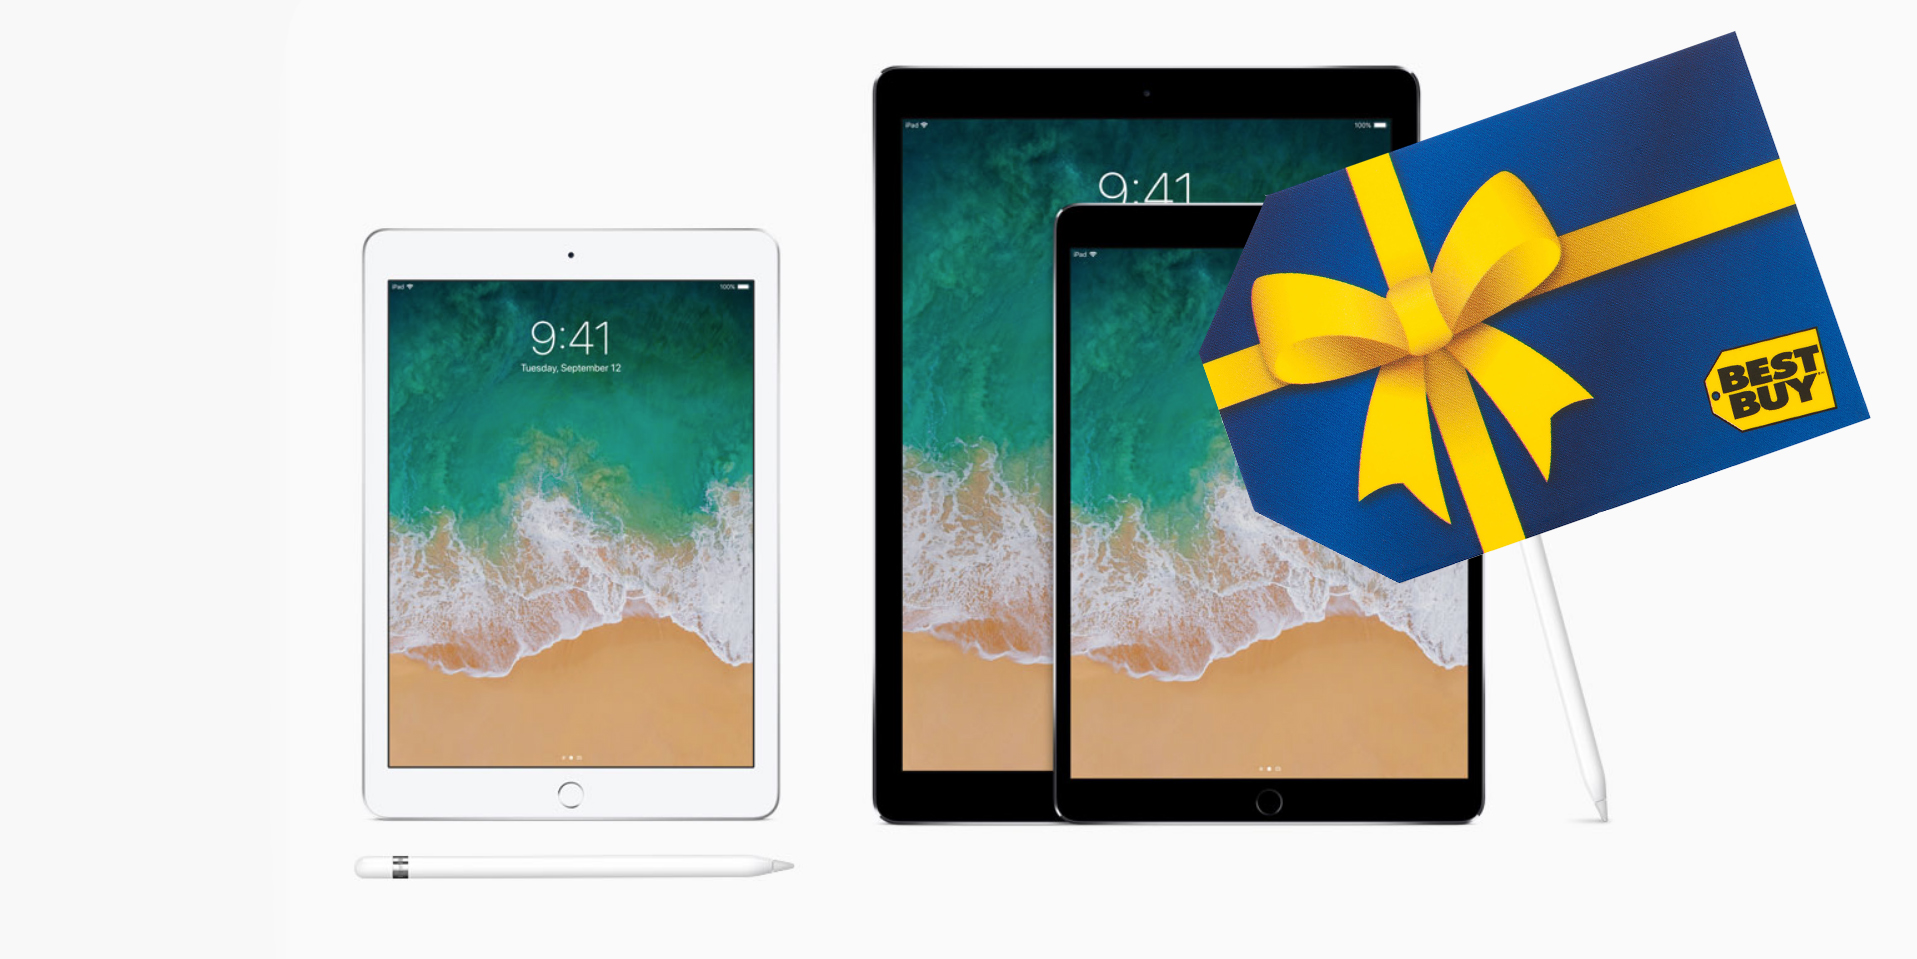 Best Buy offers minimum $125 gift card w/ iPad trade-in - 9to5Toys